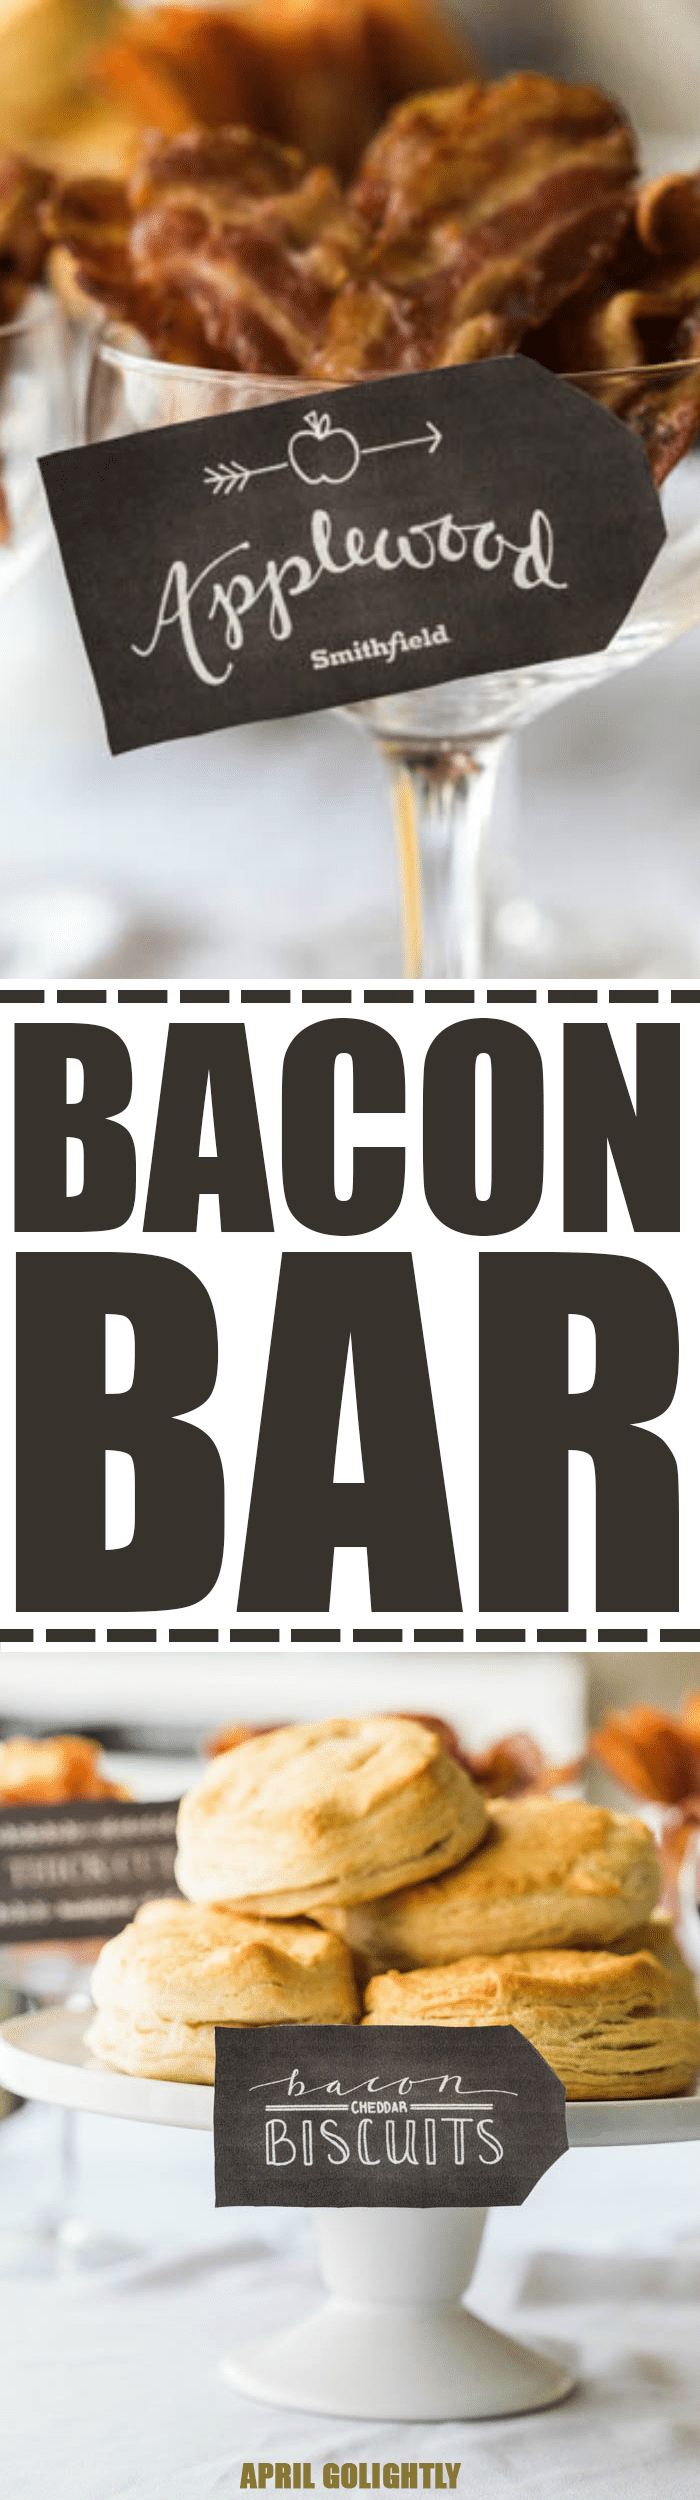 Entertain with a Bacon Bar with Bacon Cheddar Biscuits, Sea Salt Caramel, and different bacons being served with Orange Juice 